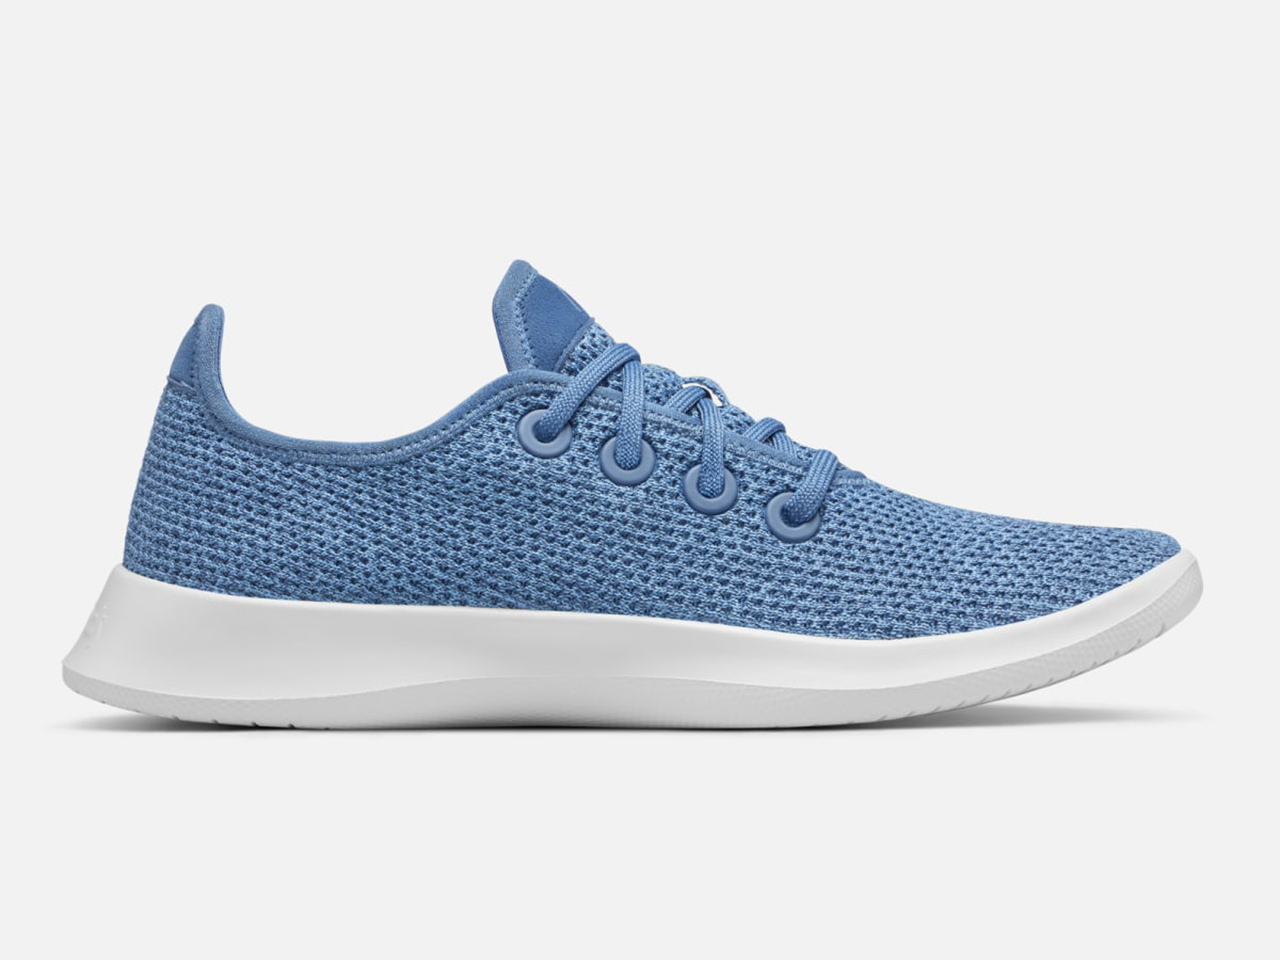 Great running shoes: Allbirds Tree Runners shoes in sapphire